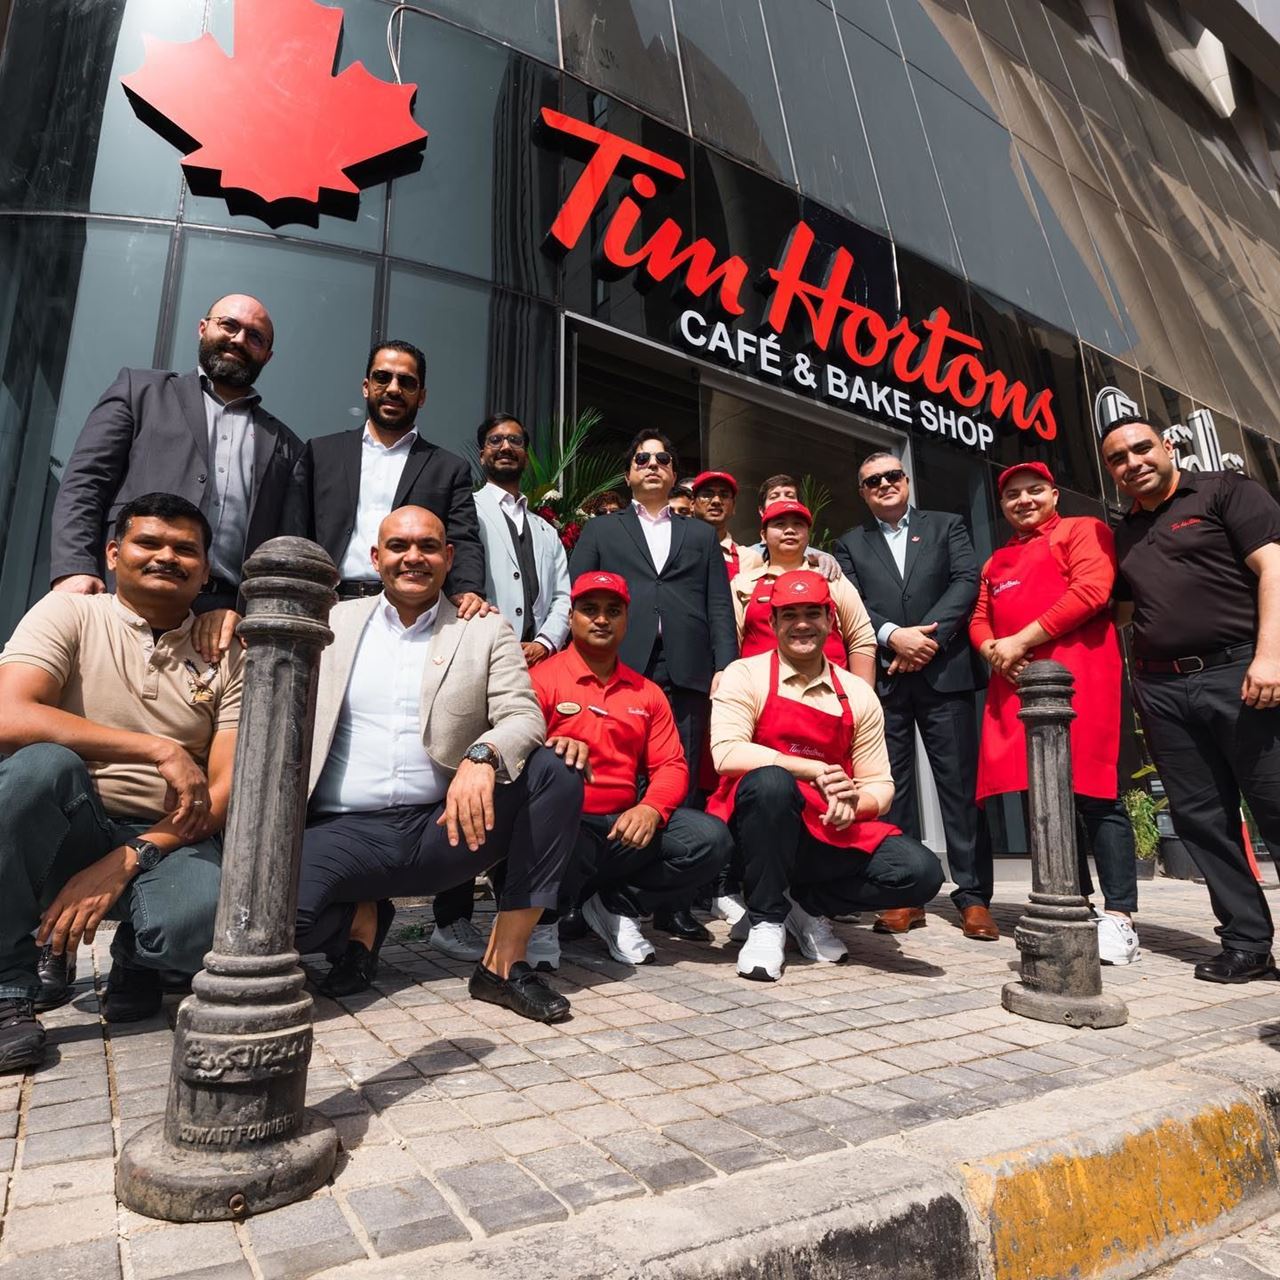 Five Tim Hortons Branches Now Open in Kuwait